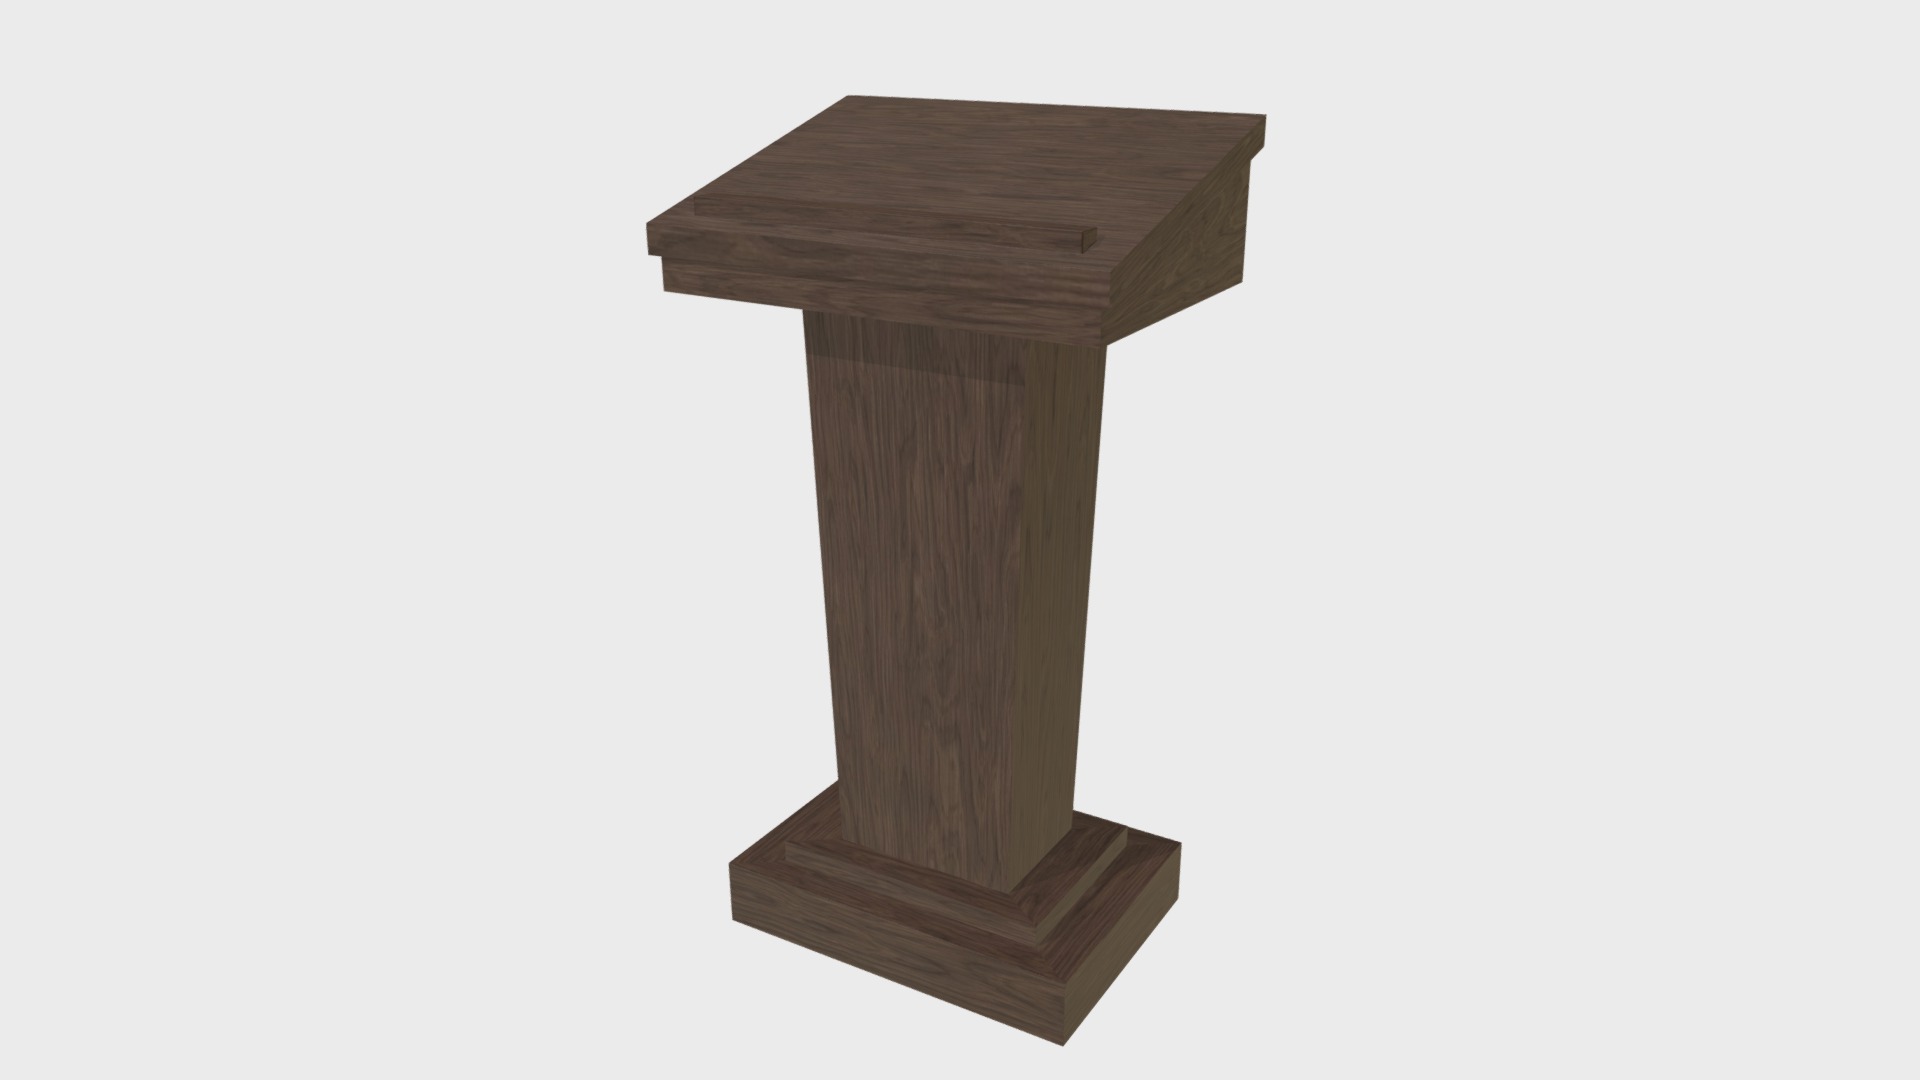 3D model Podium 1 - This is a 3D model of the Podium 1. The 3D model is about a wooden block with a white background.